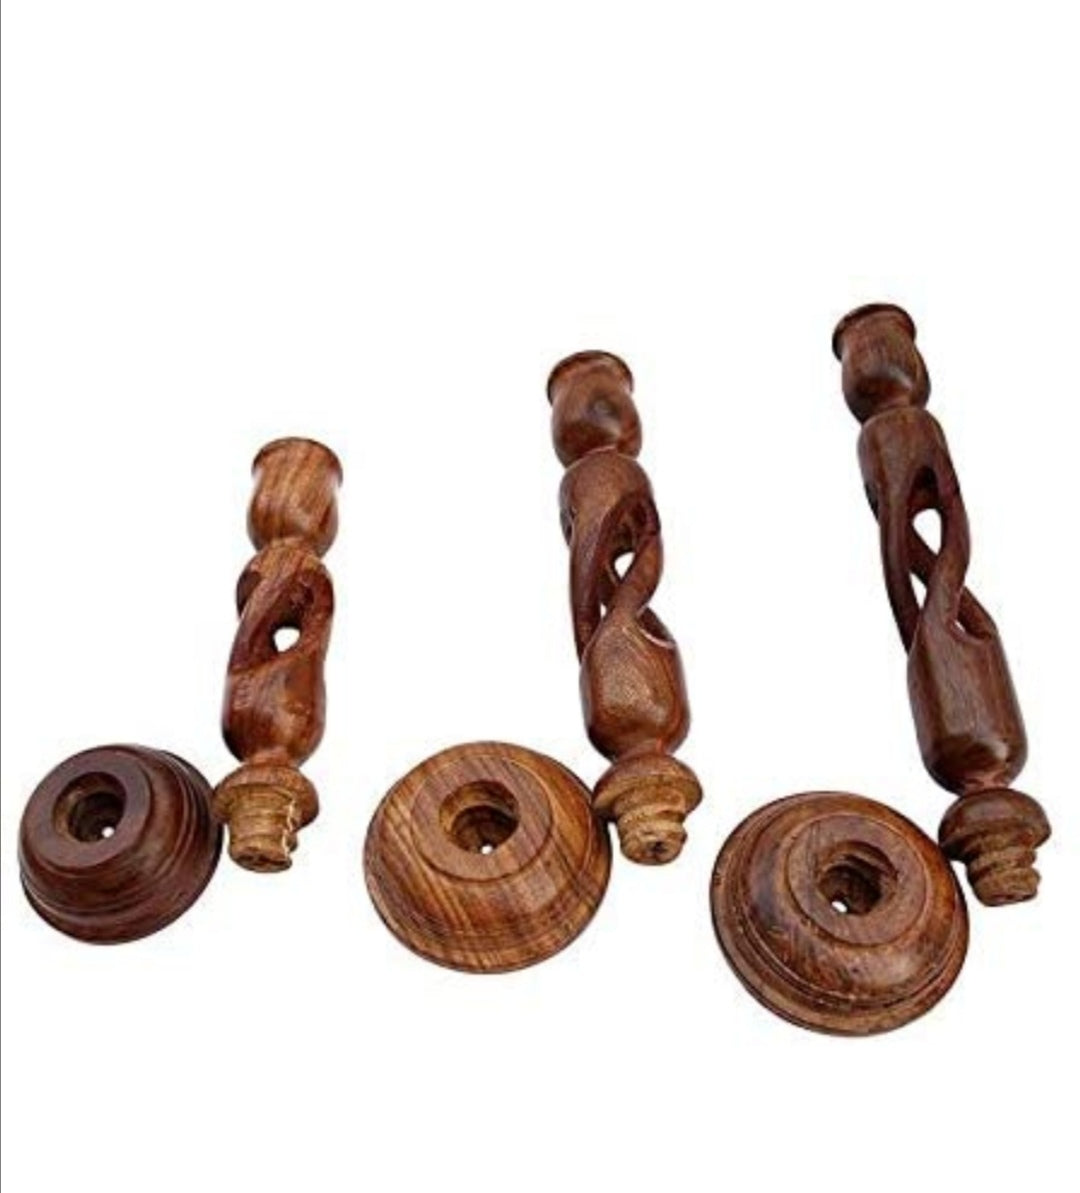 Wooden Candle Holder Stand for Home Décor | Tealight Gifts Item | Set of 3 | Large, Medium and Small